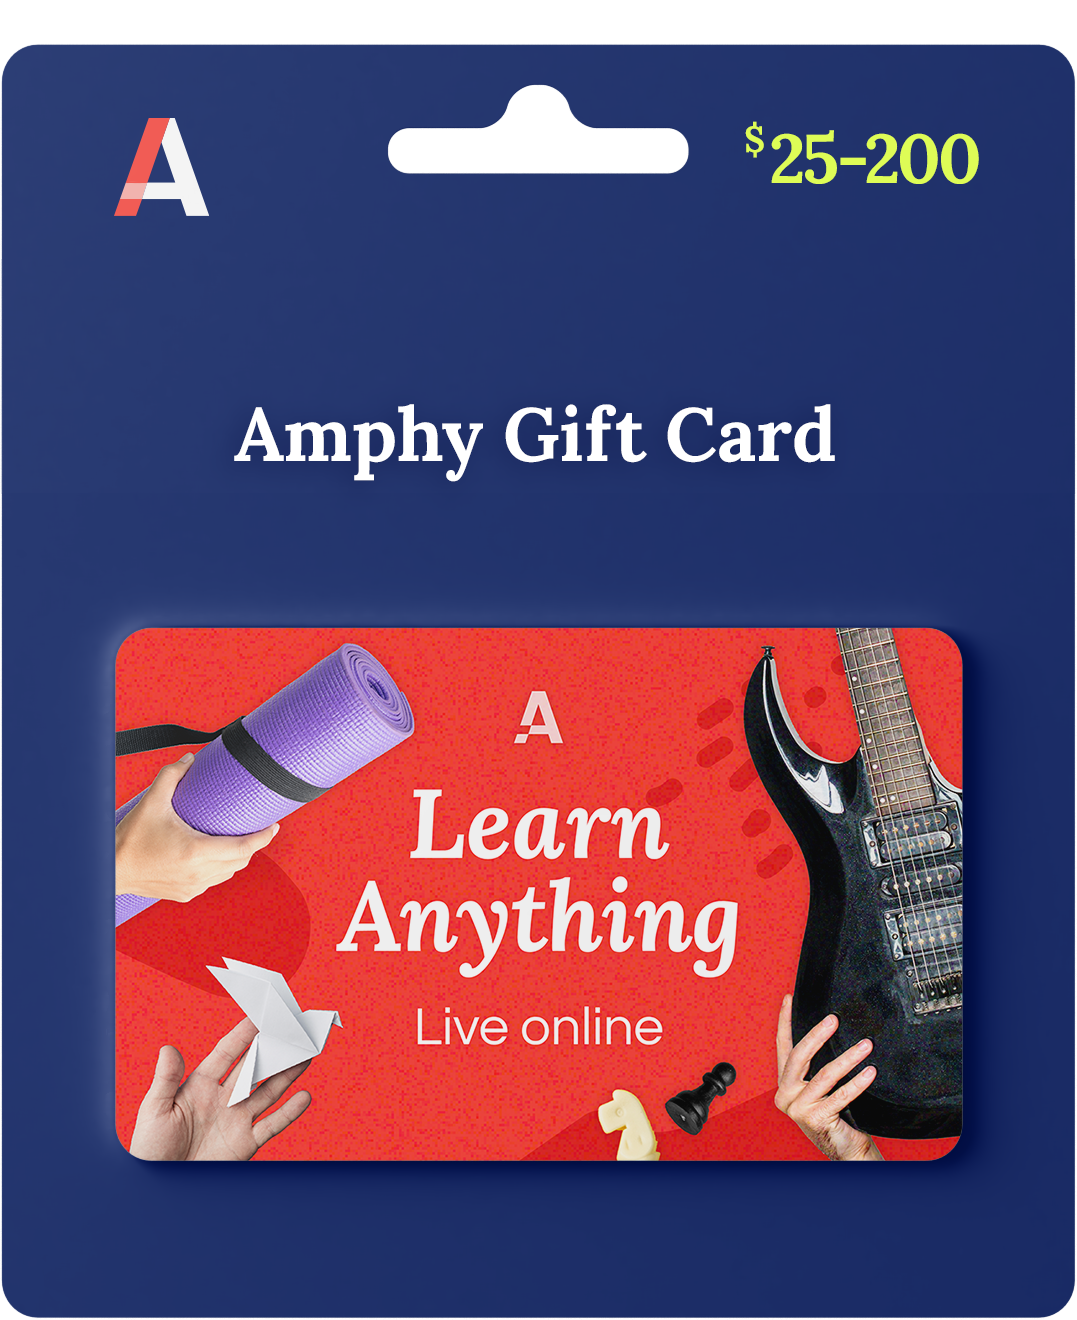 Amphy gift card (Credit: Adcore studio)